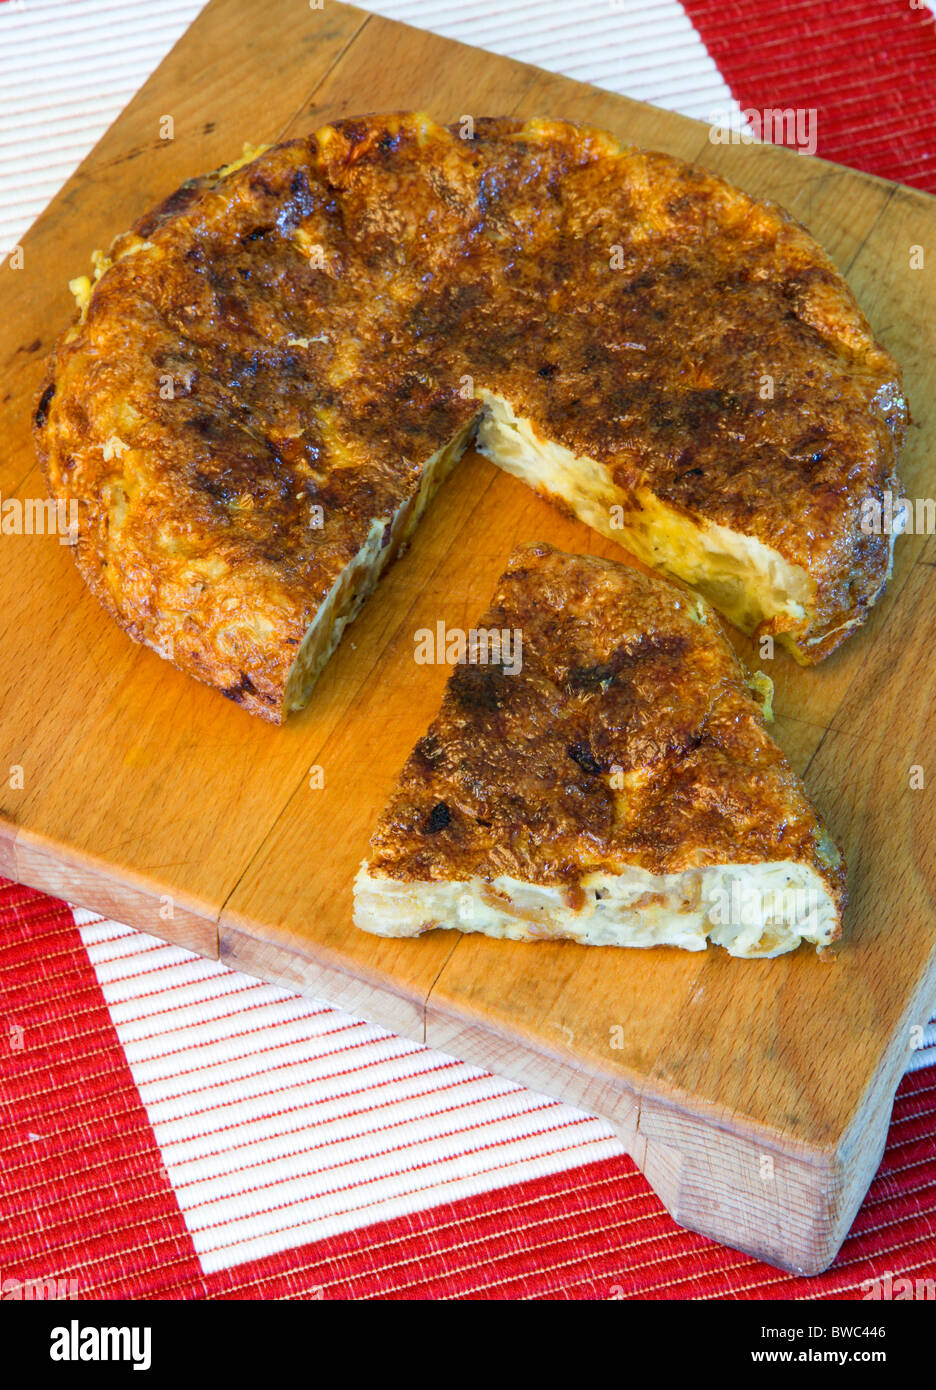 Food, Cooked, Eggs, Spanish omelette or tortilla on a wooden chopping board with a slice cut out. Stock Photo